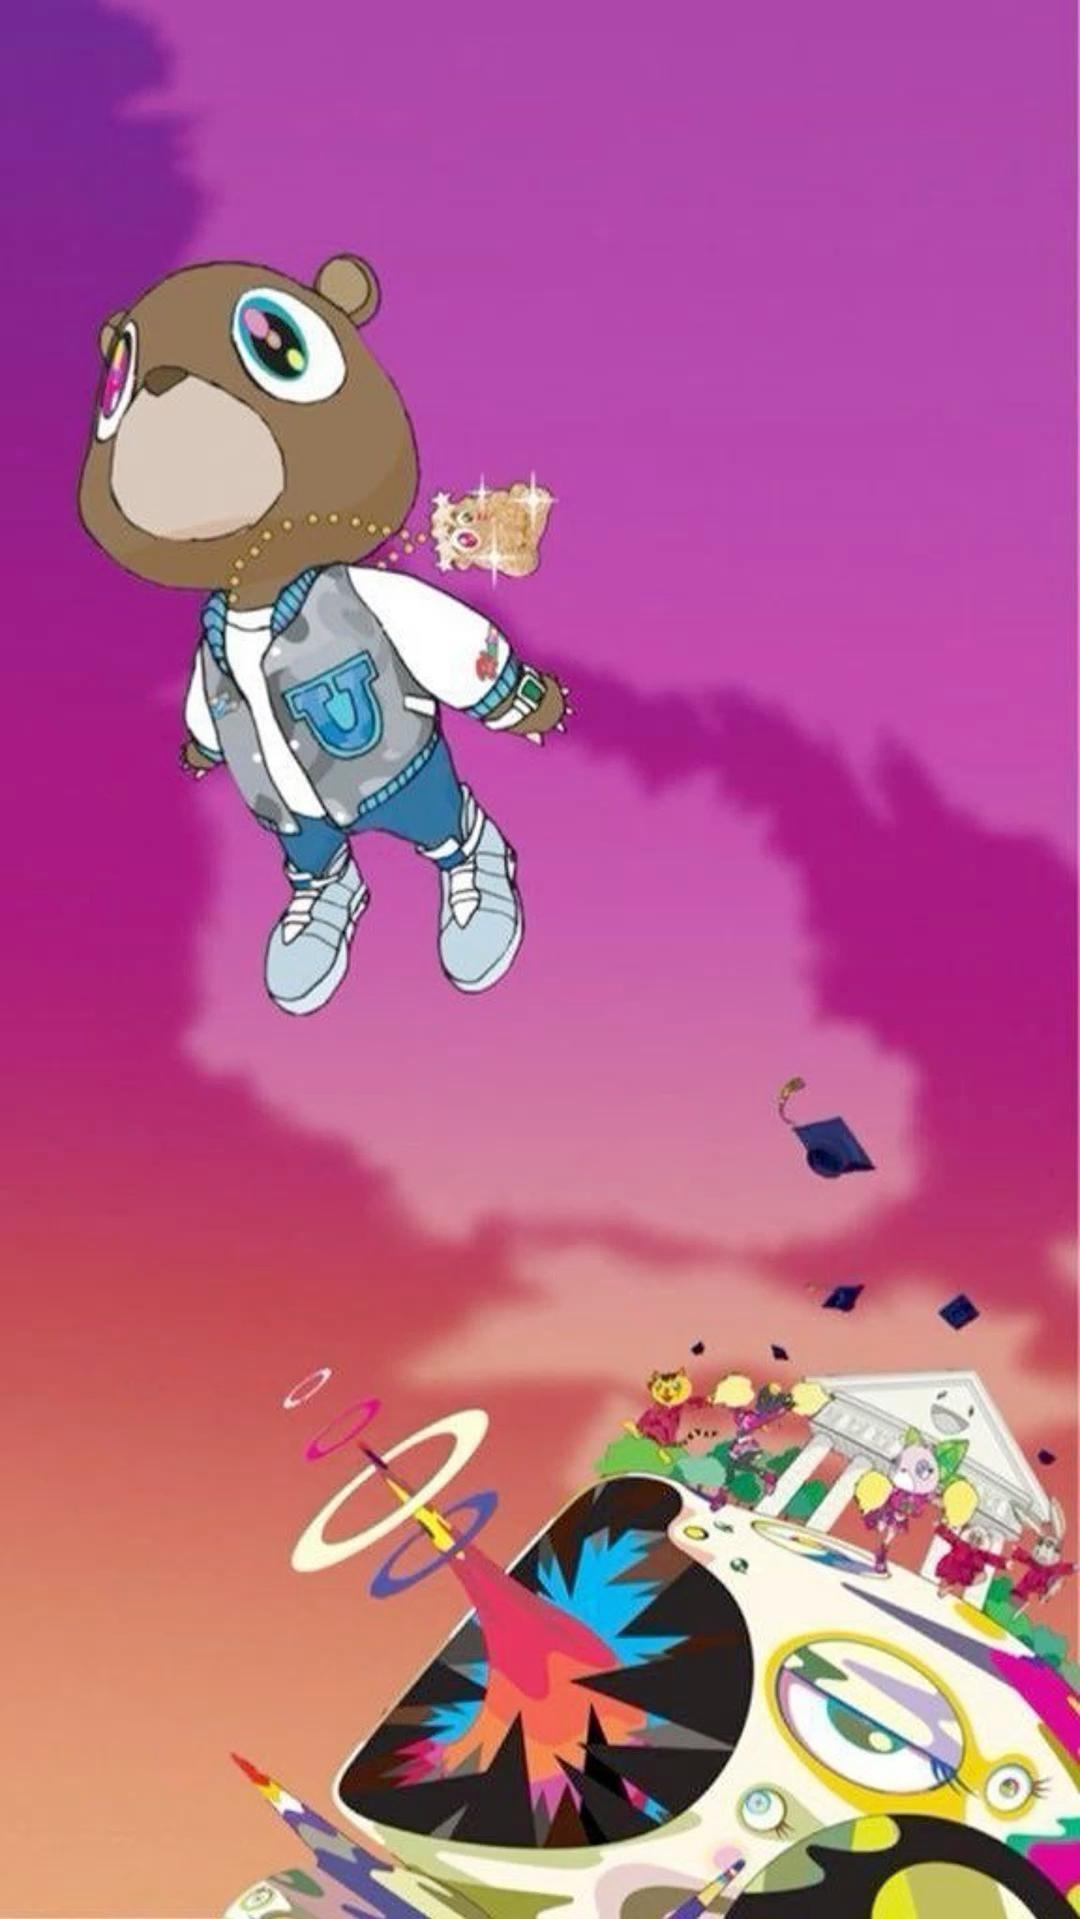 Kanye West Album Cover Wallpaper iPhone Cute